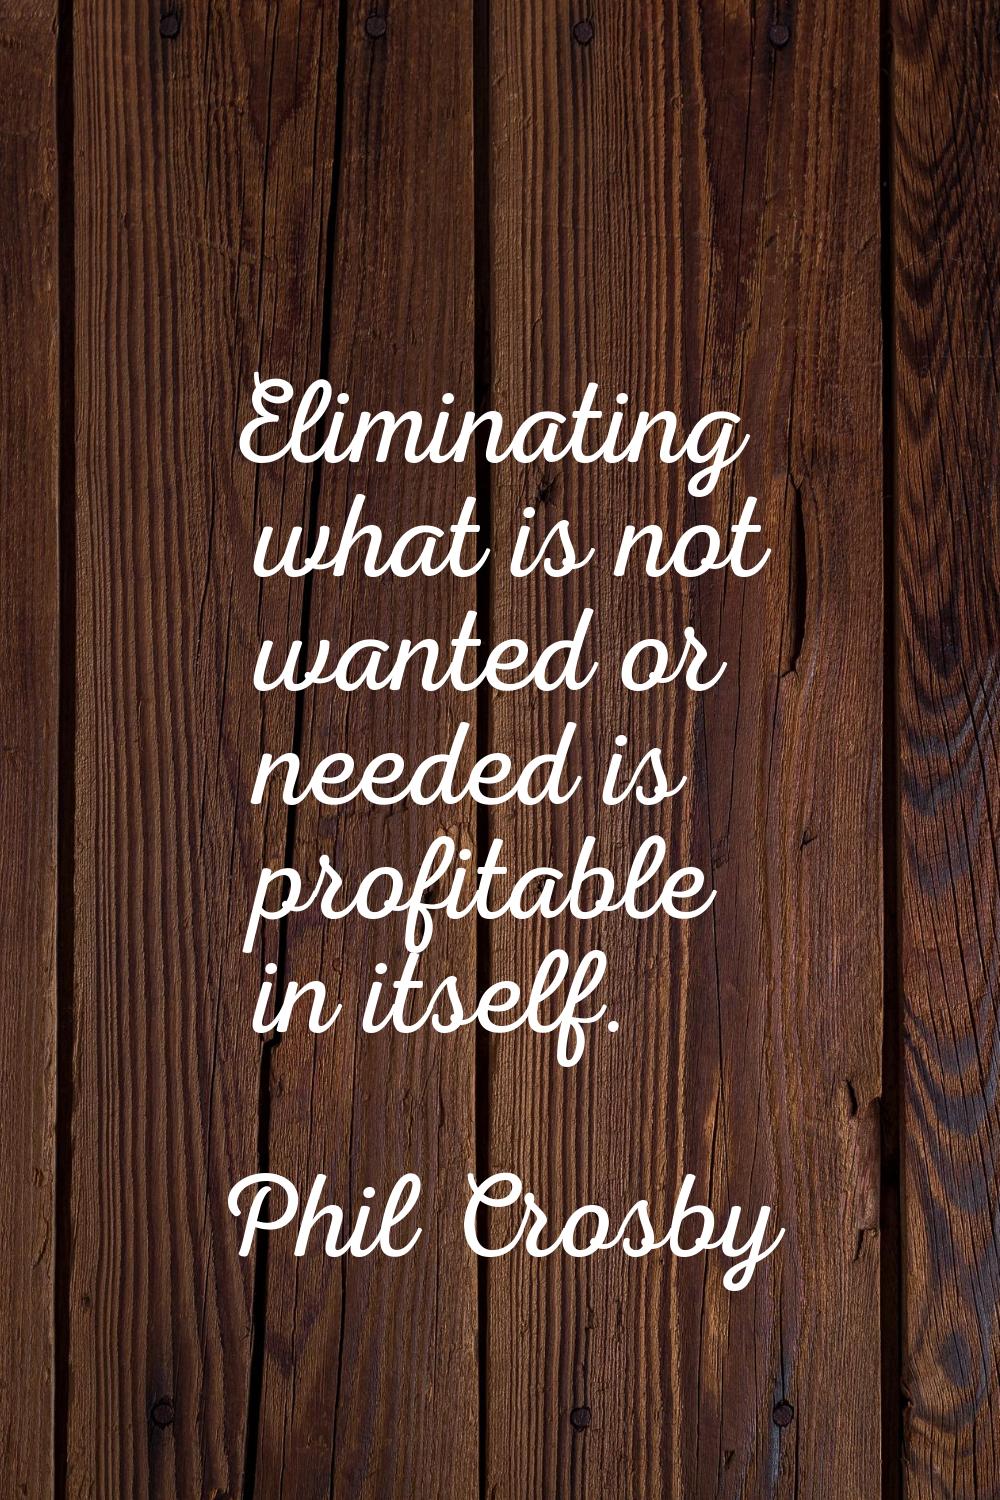 Eliminating what is not wanted or needed is profitable in itself.